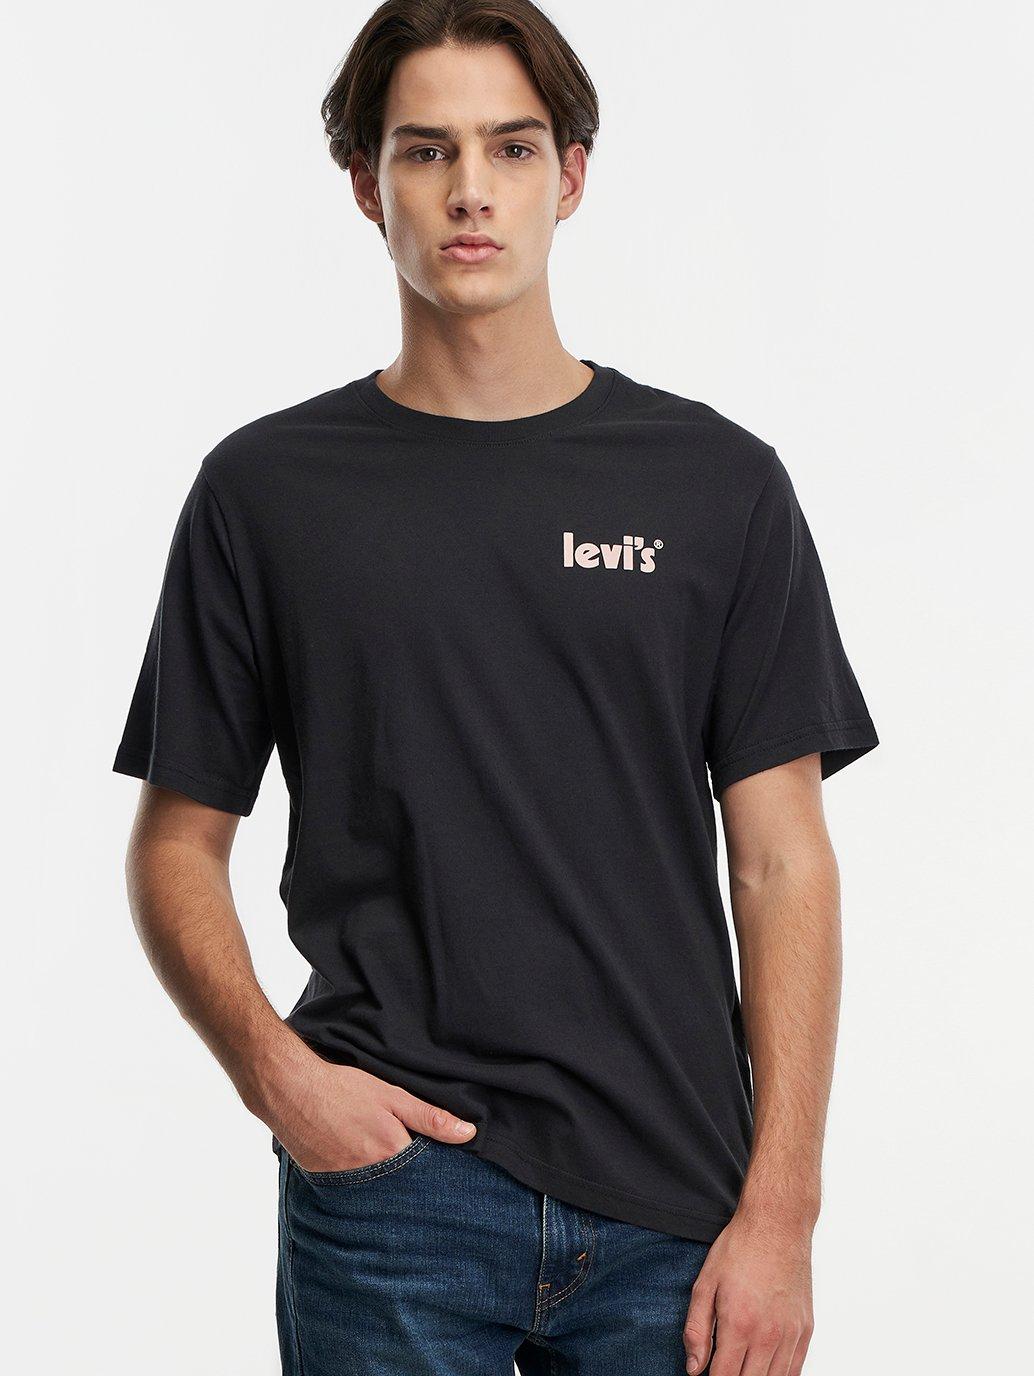 Buy Levi's® Men's Relaxed Fit Short Sleeve T-Shirt | Levi’s® Official ...